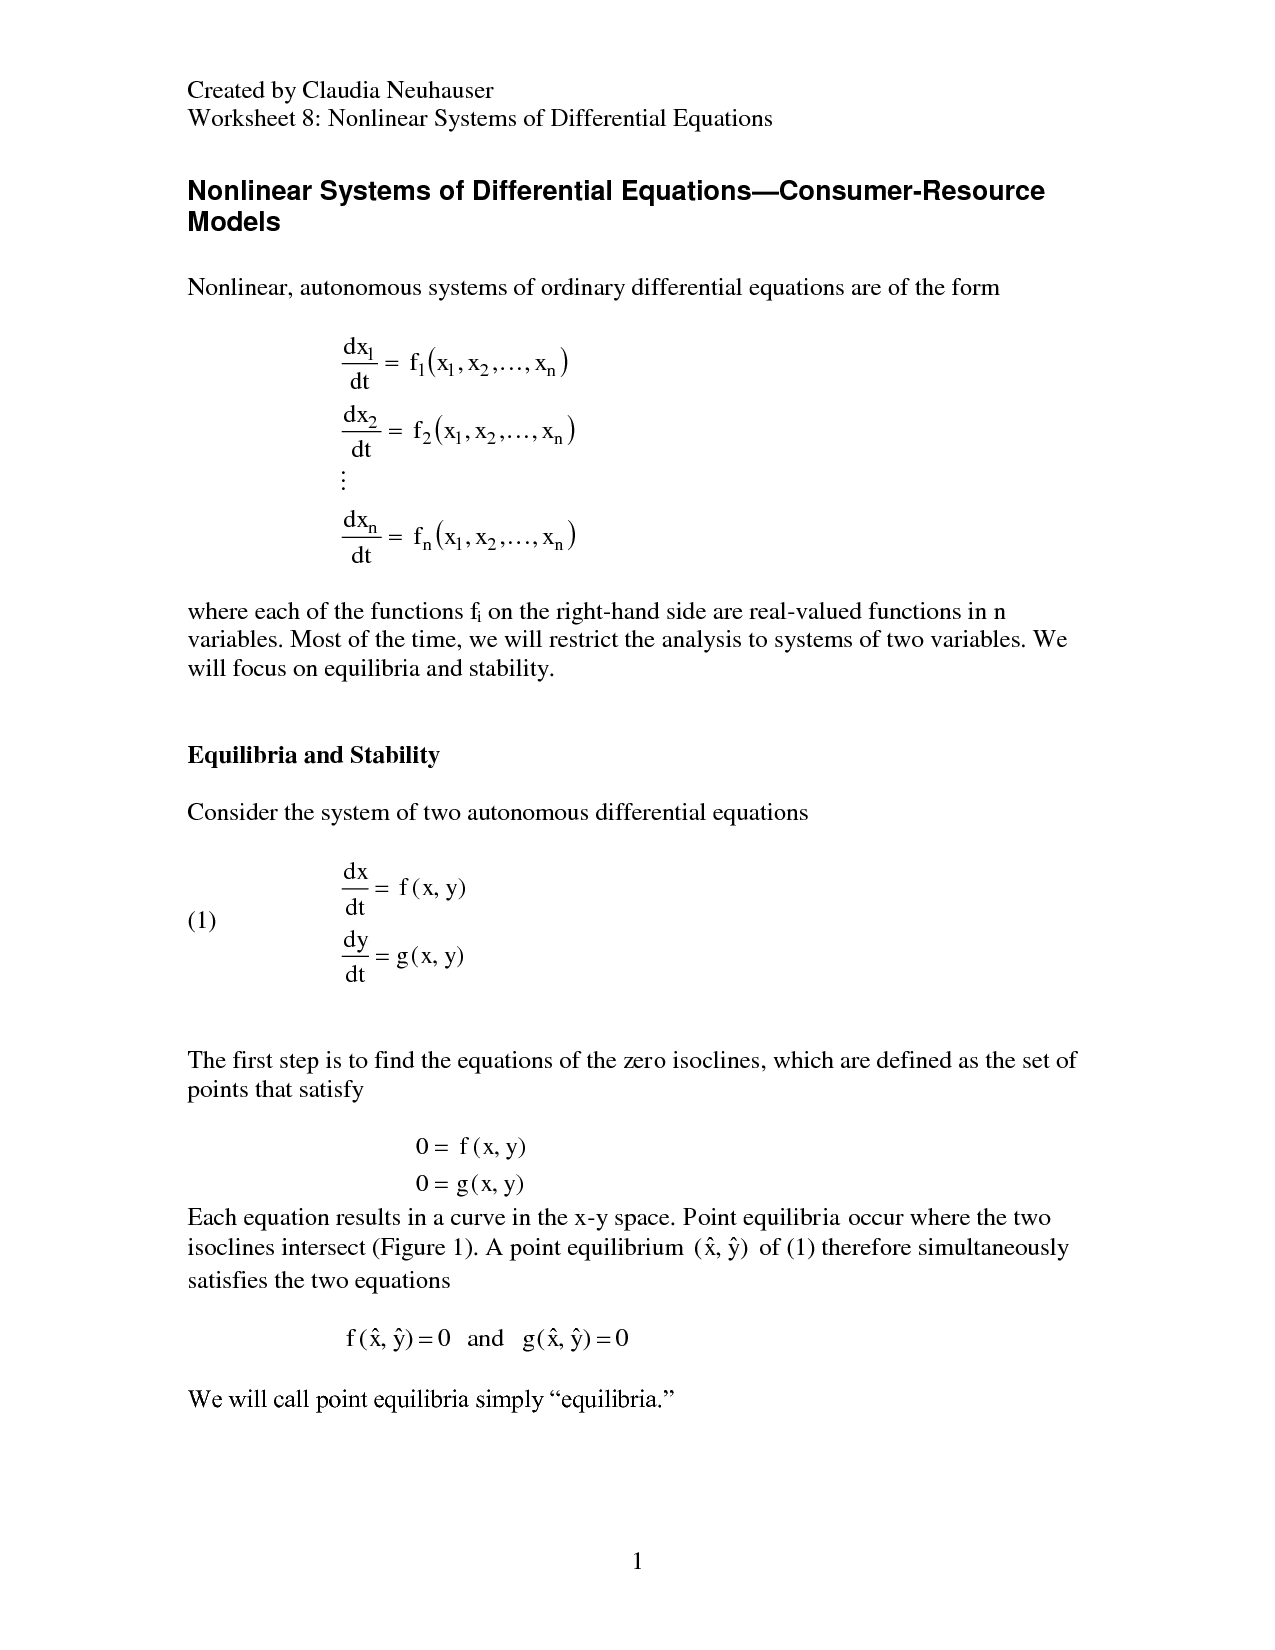 Nonlinear Systems of Equations Worksheets Image